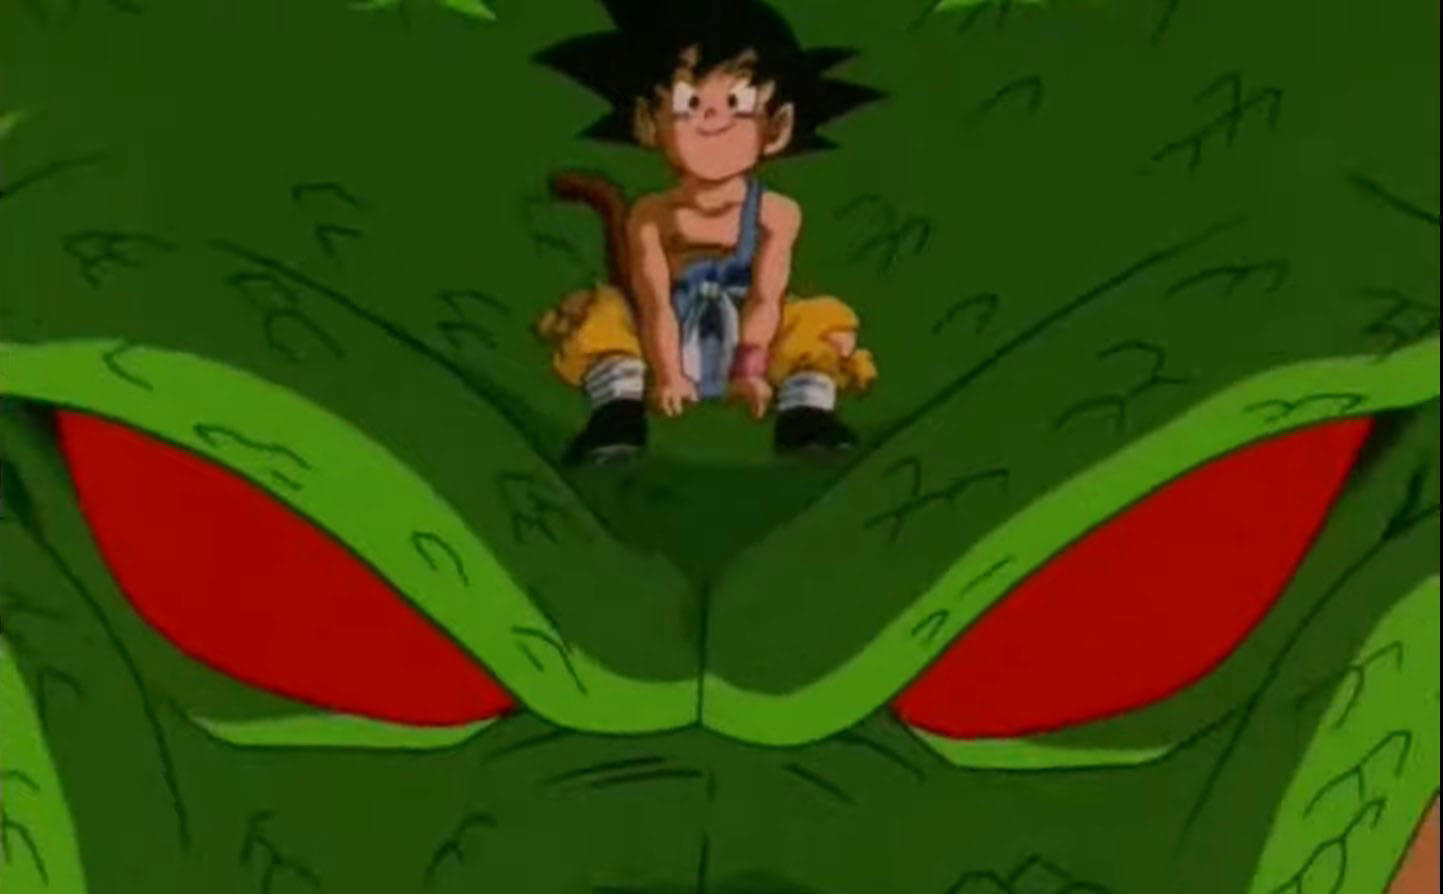 Dragon Ball GT Ending Explained: Why Did Goku Leave With Shenron?